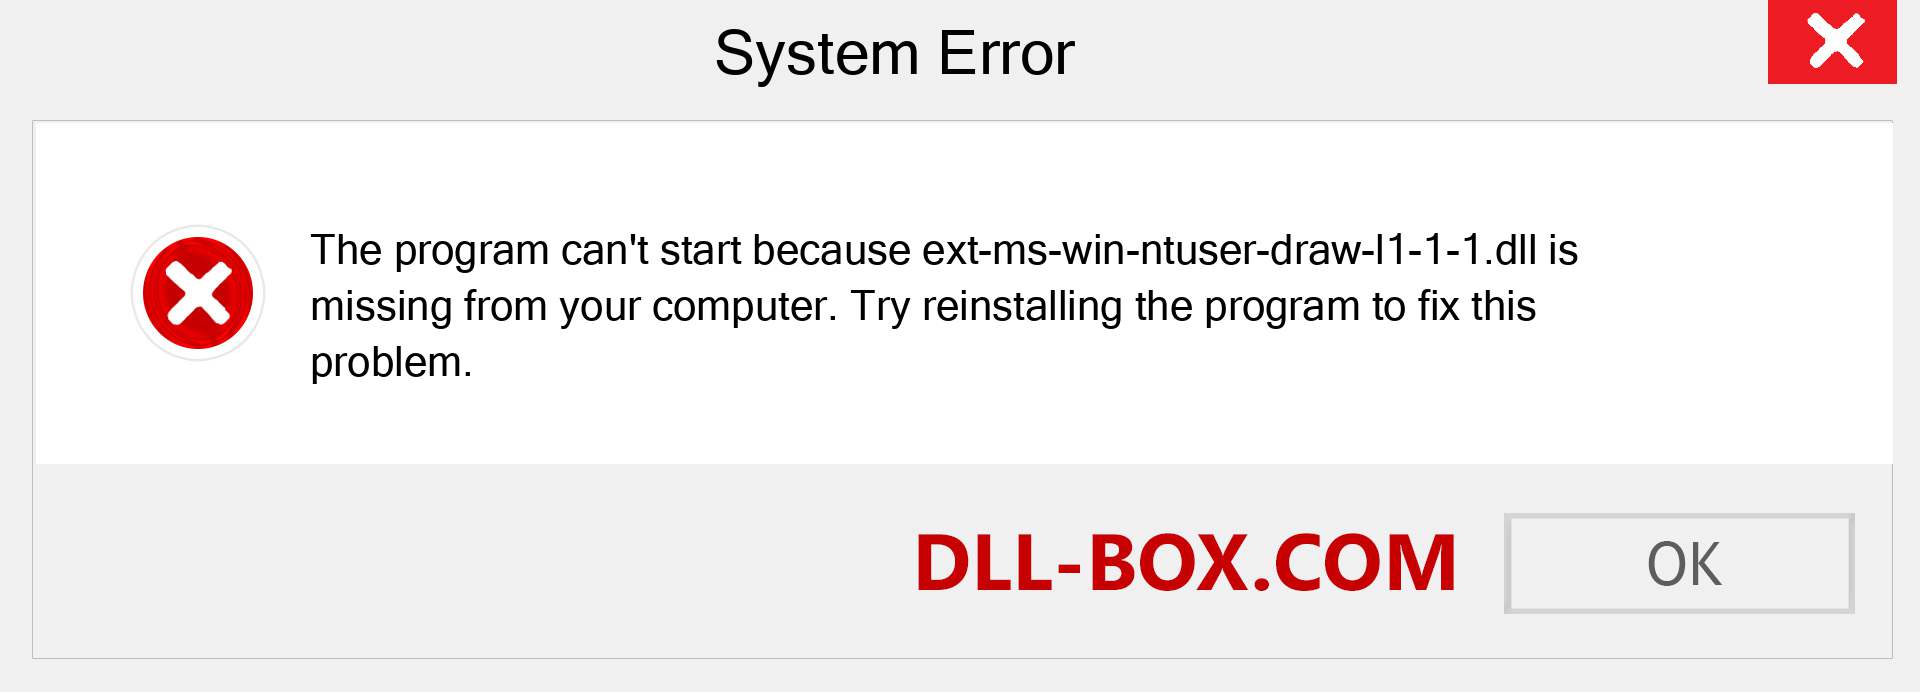  ext-ms-win-ntuser-draw-l1-1-1.dll file is missing?. Download for Windows 7, 8, 10 - Fix  ext-ms-win-ntuser-draw-l1-1-1 dll Missing Error on Windows, photos, images